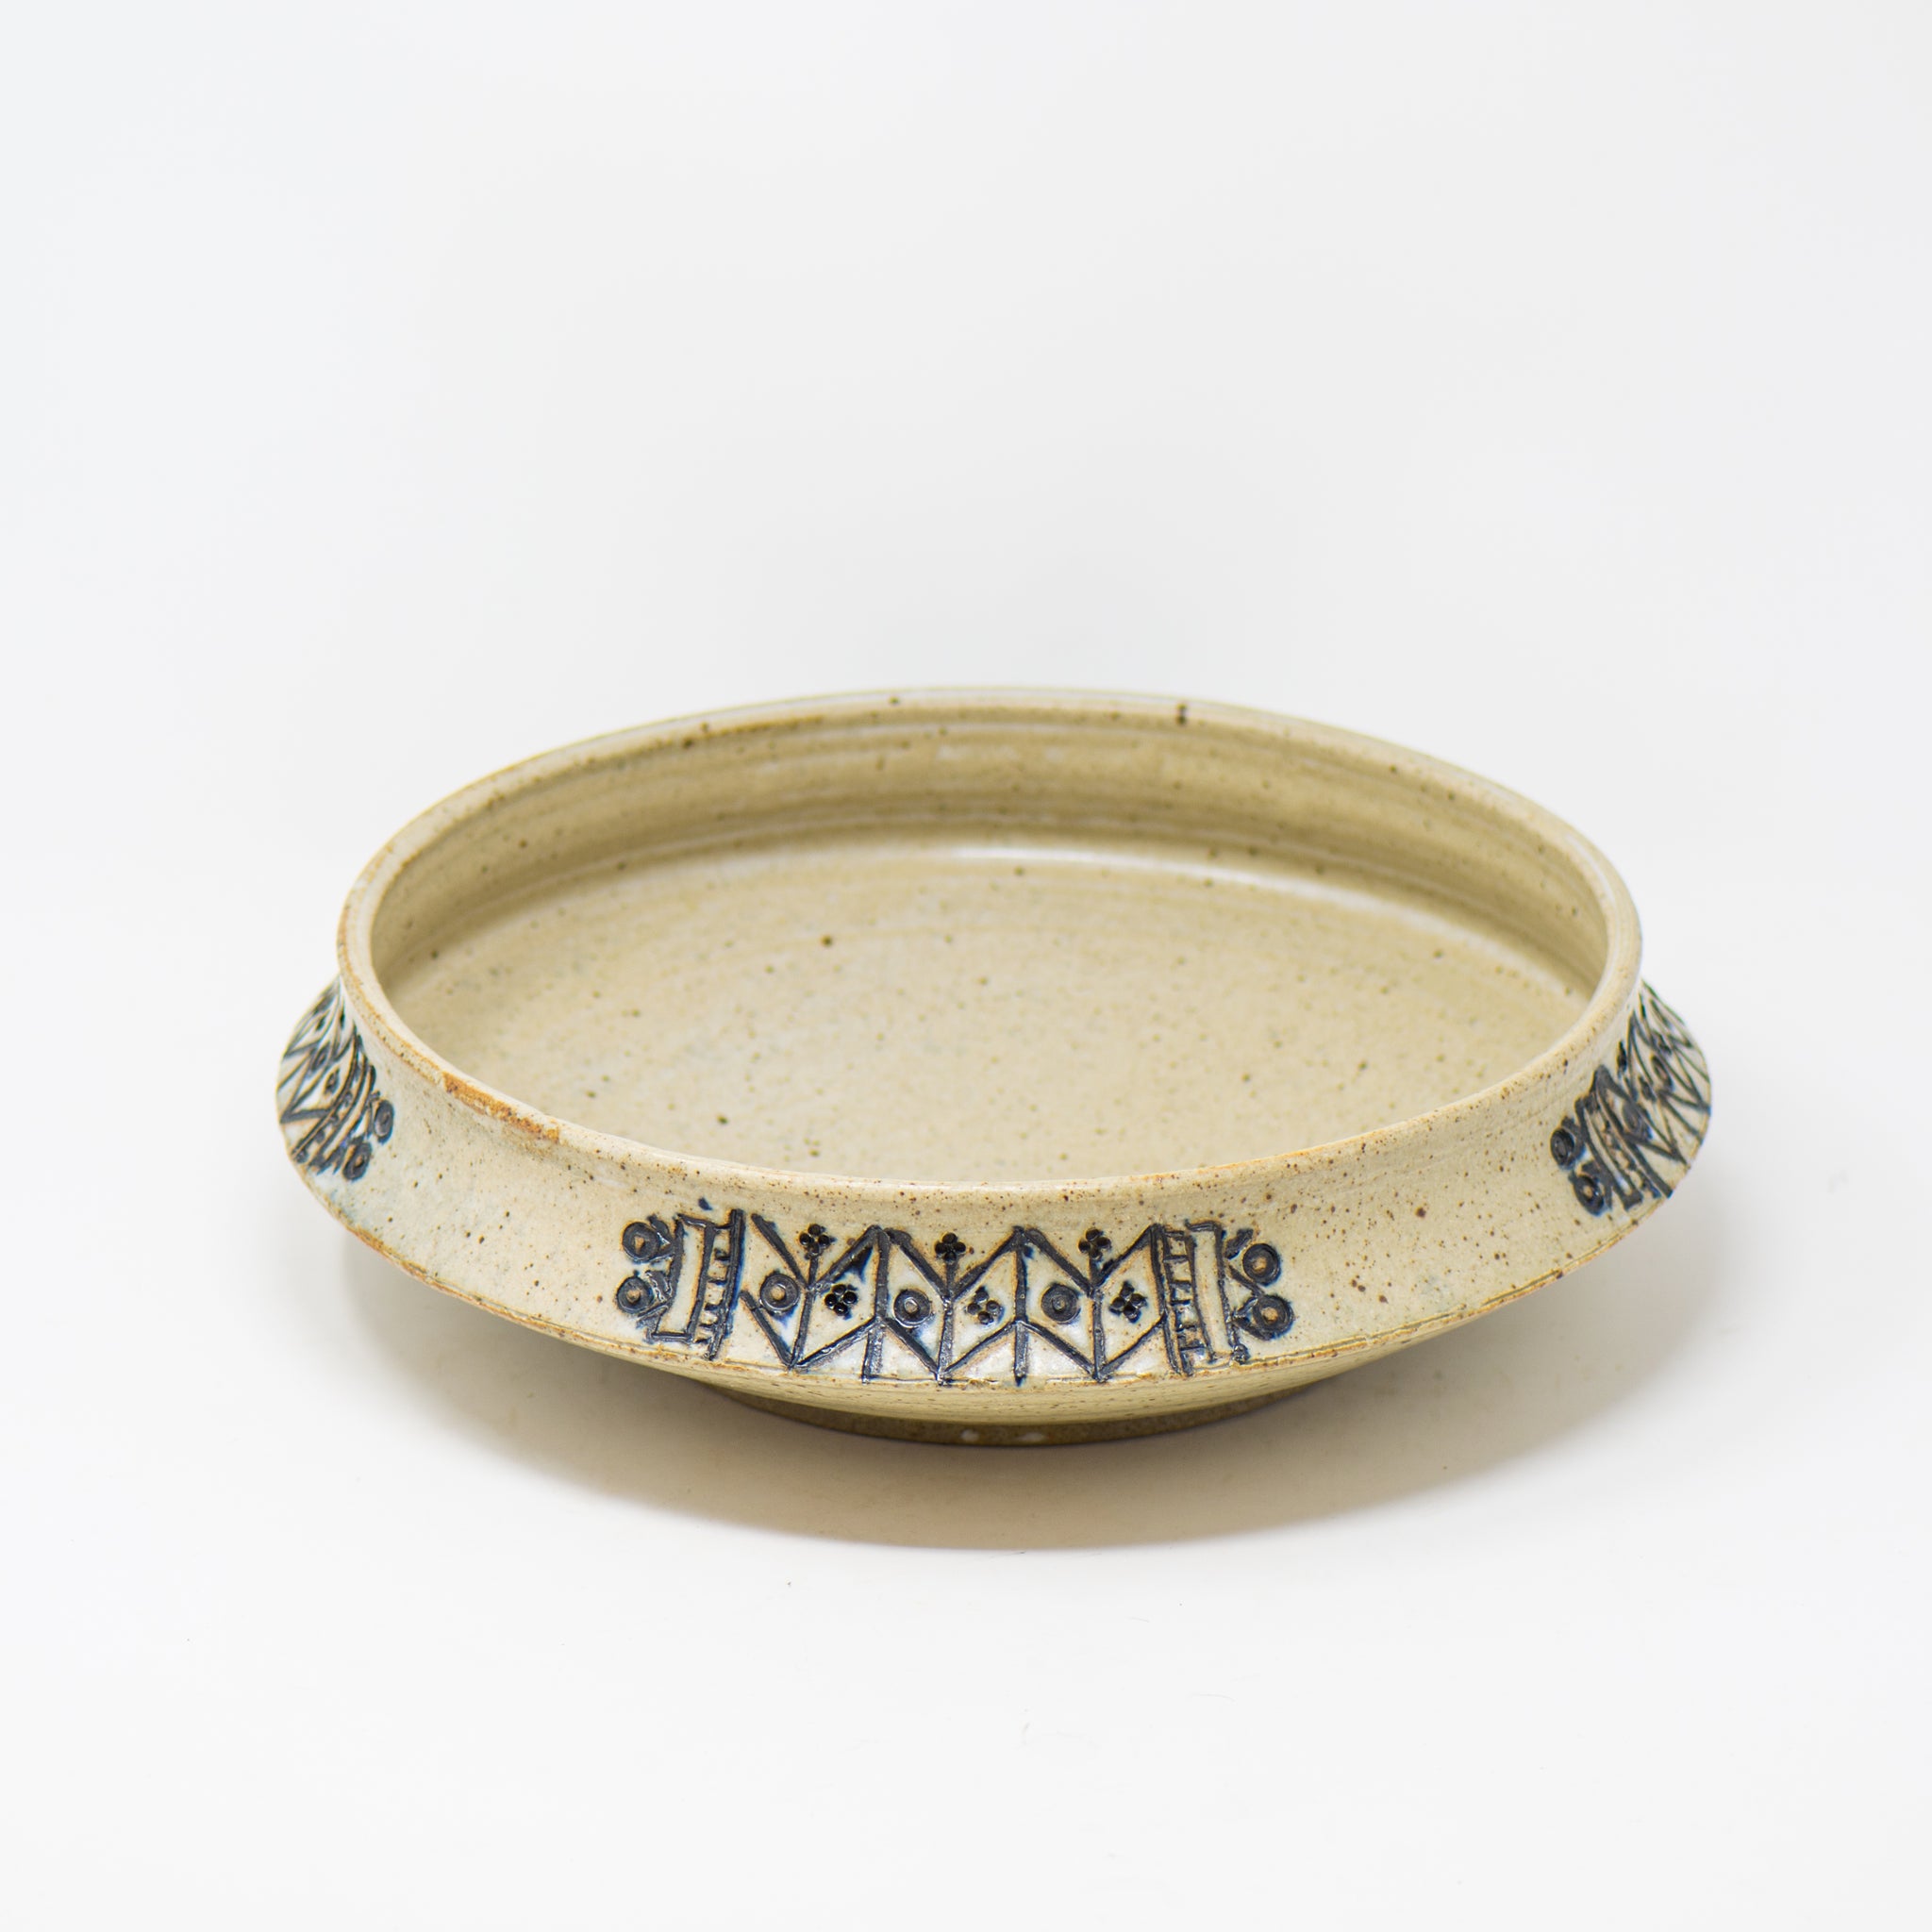 Finnish Embroidery Bowl